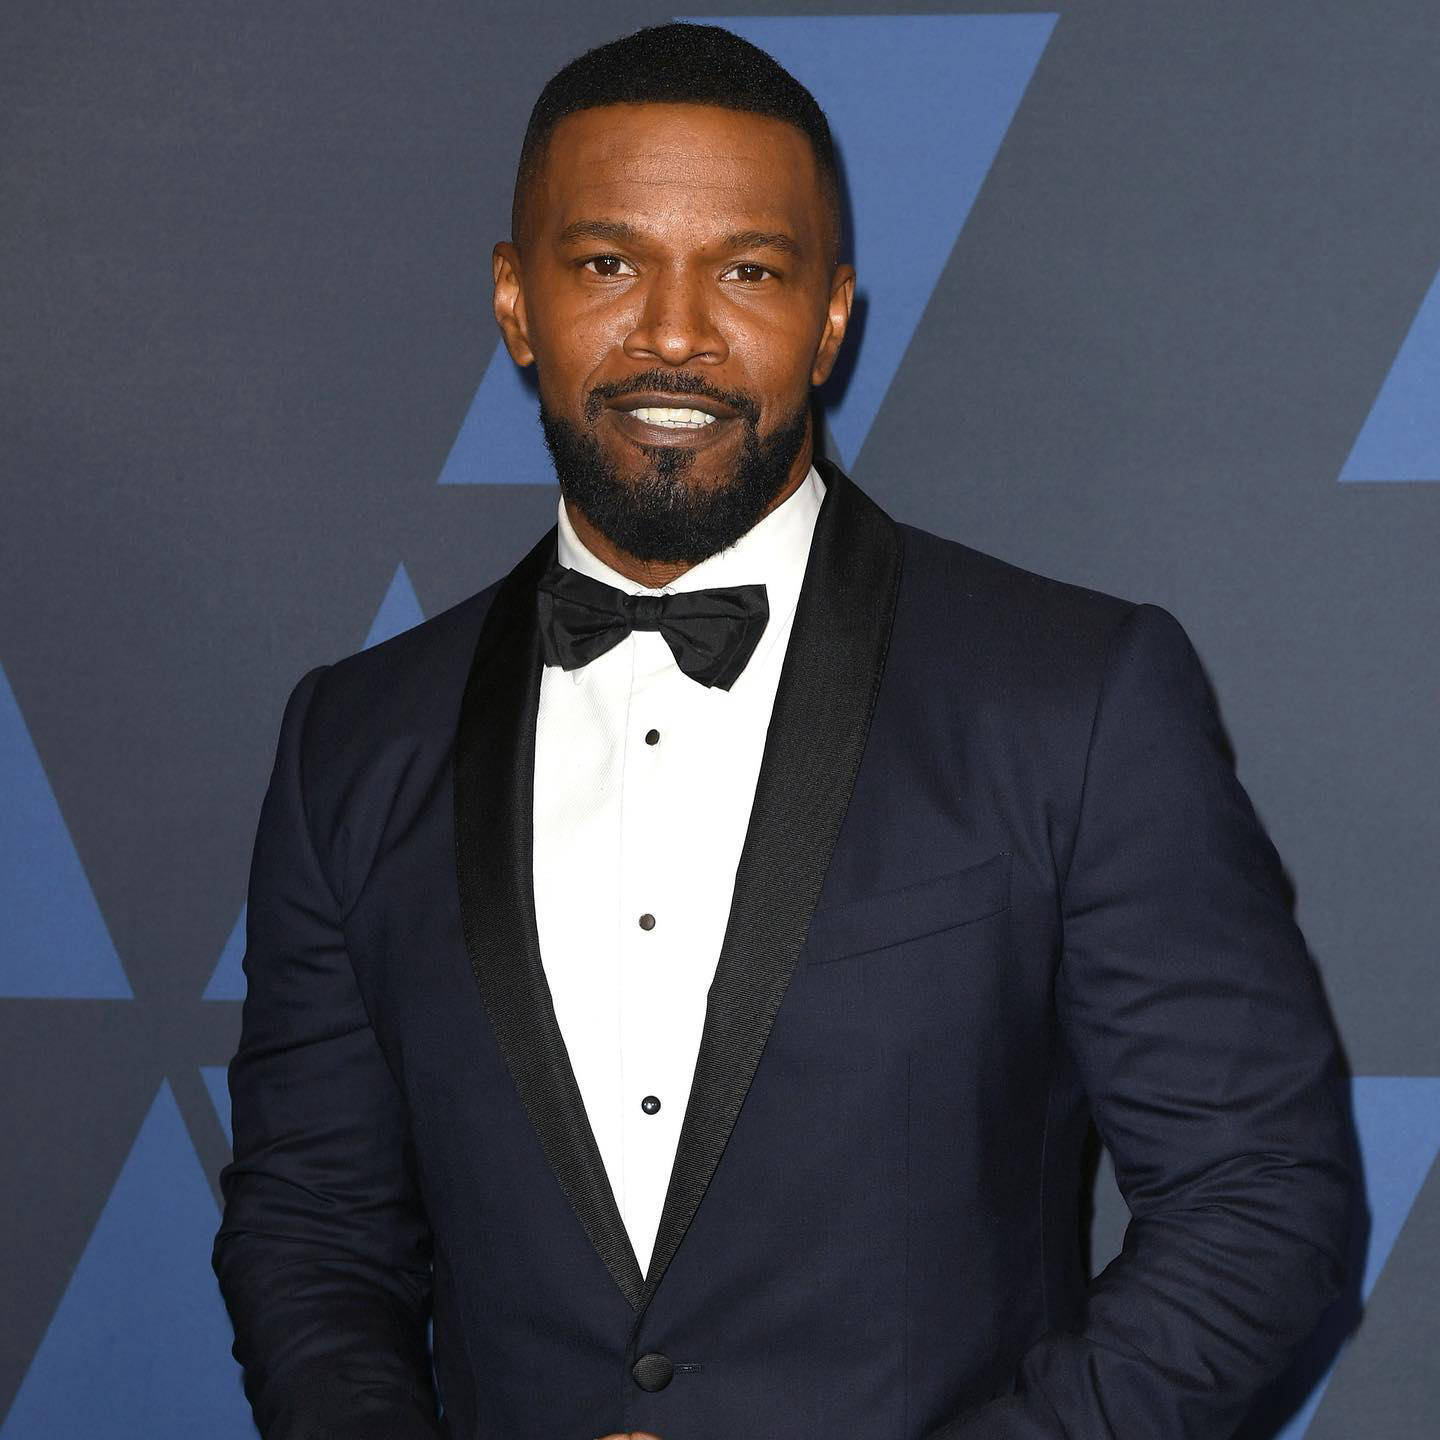 Jamie Foxx is recovering after experiencing a “medical complication,” his daughter Corinne announced